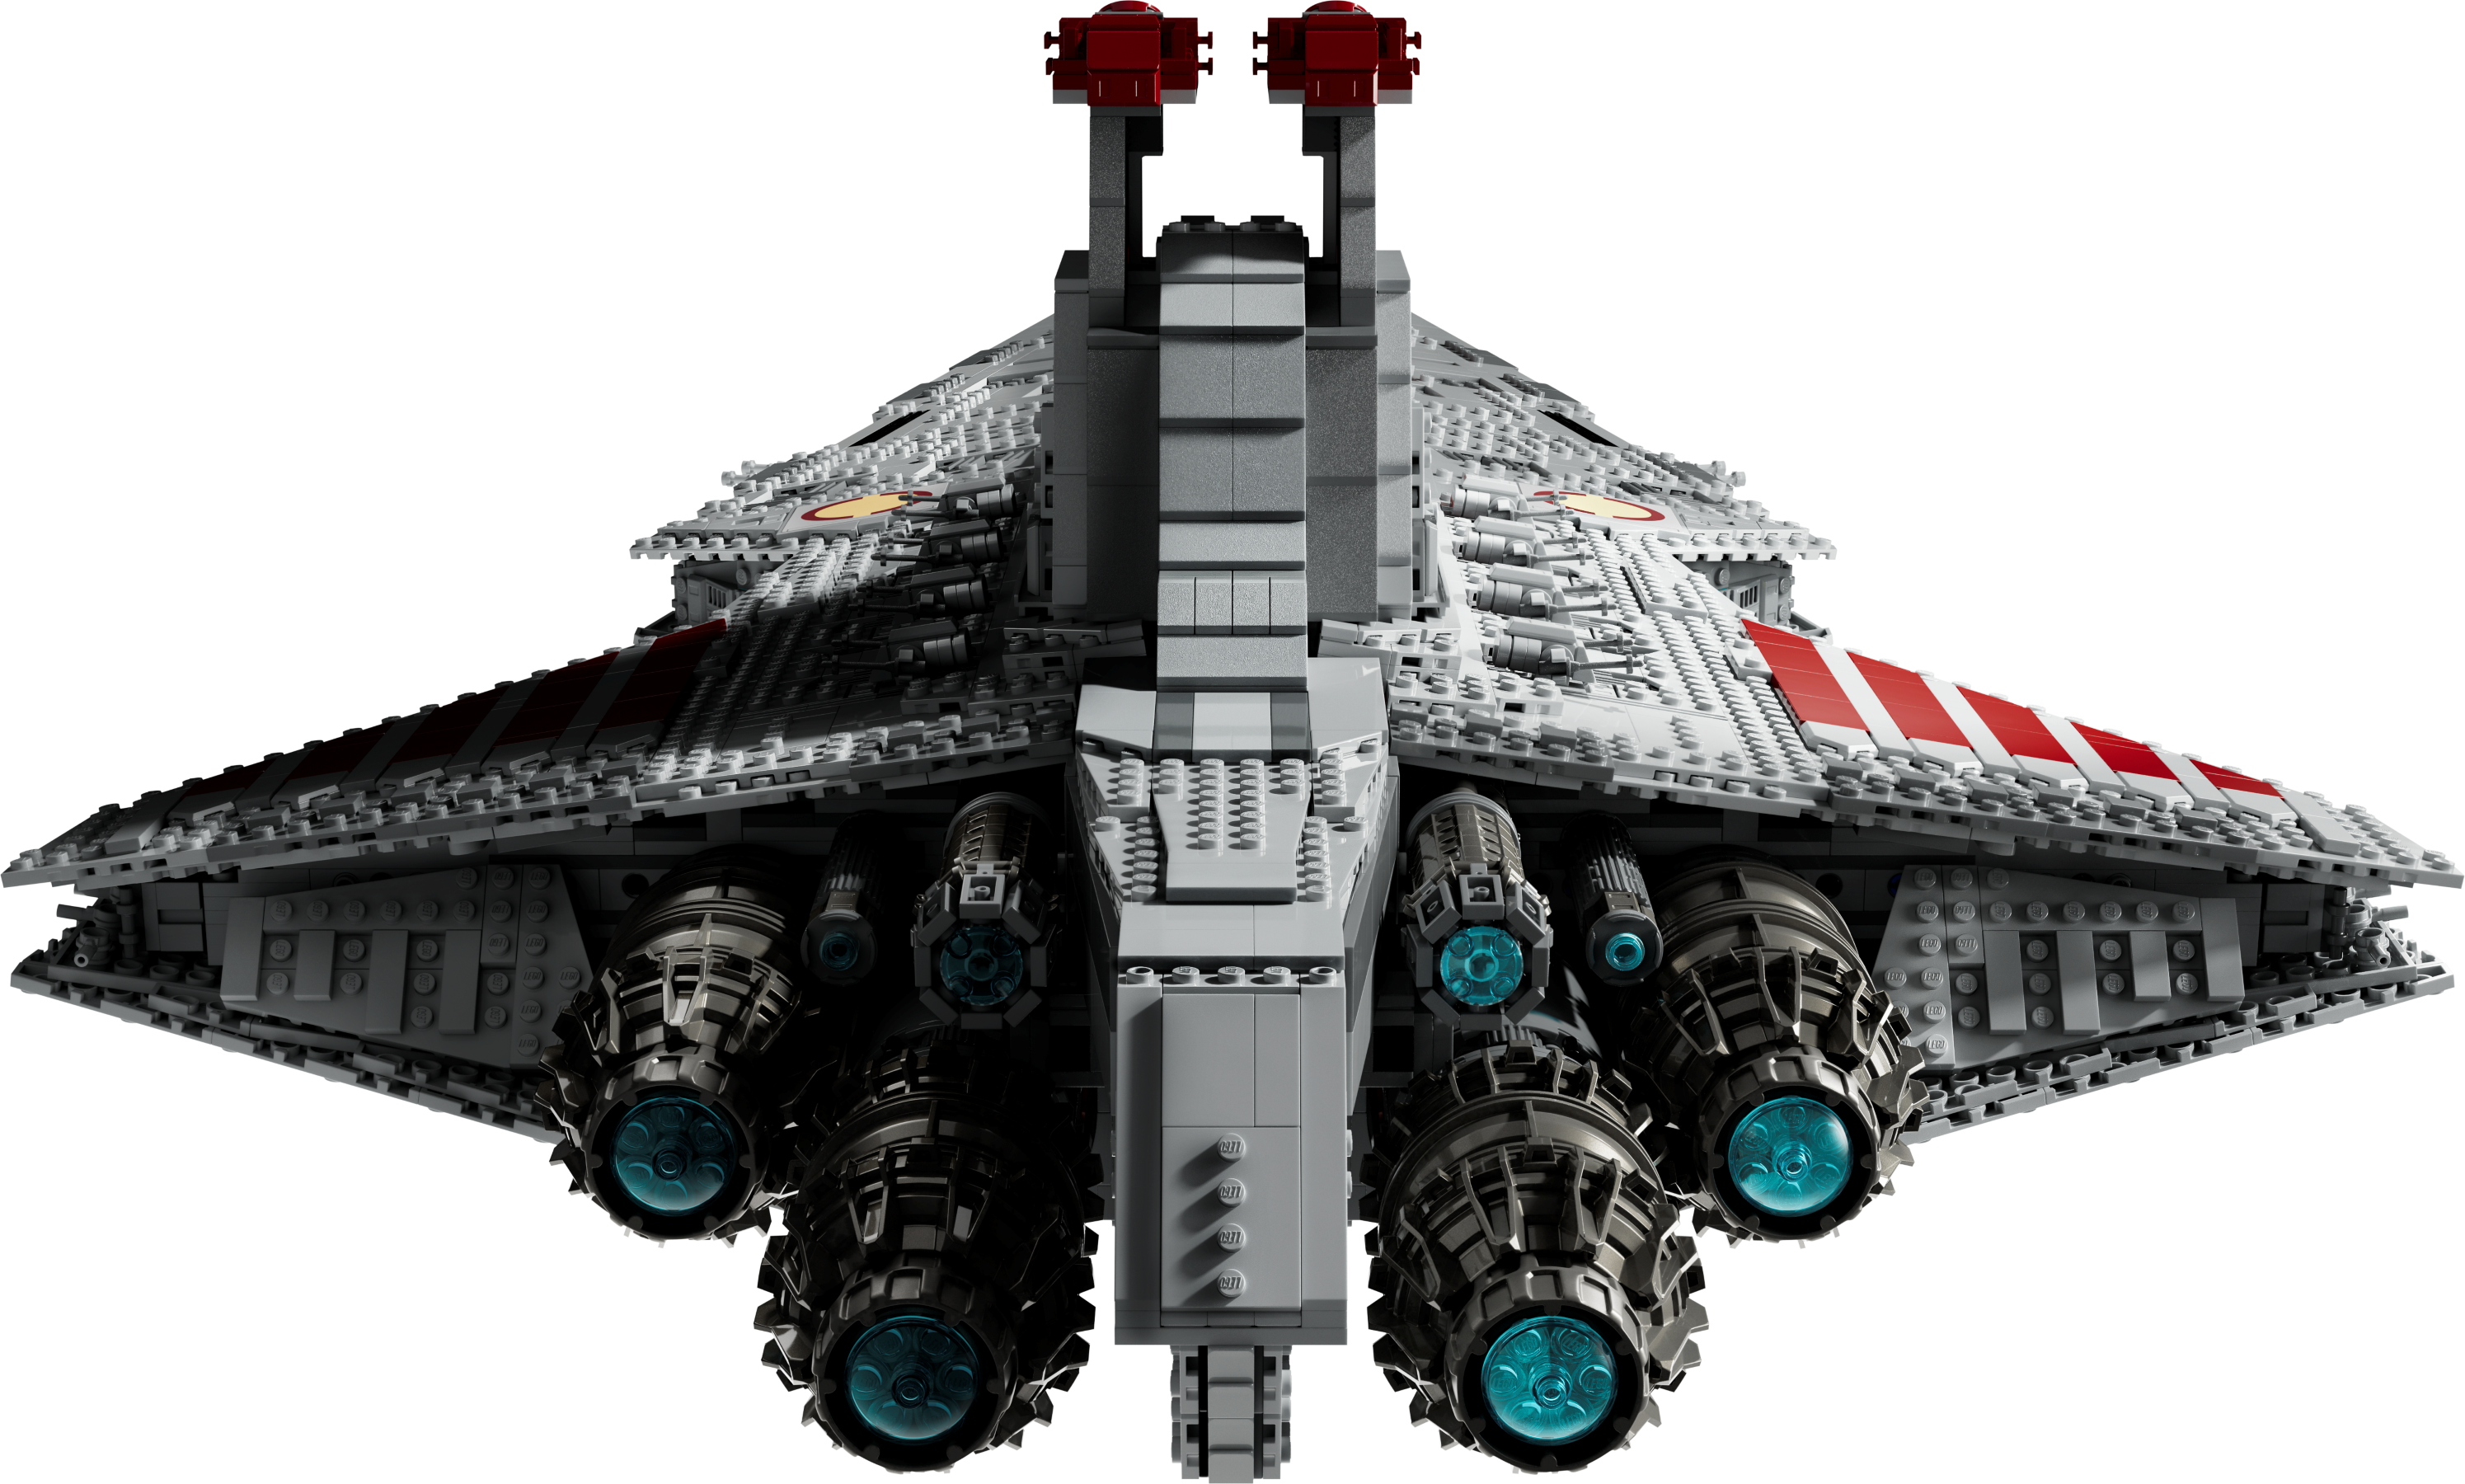 UCS Venator Republic Attack Cruiser Destroyer Building Blocks Set Back Mould  KING Star Plan Toy With MOC 0694 Assembly Bricks Perfect Birthday And  Christmas Gifts For Kids From Hjm9706, $266.54